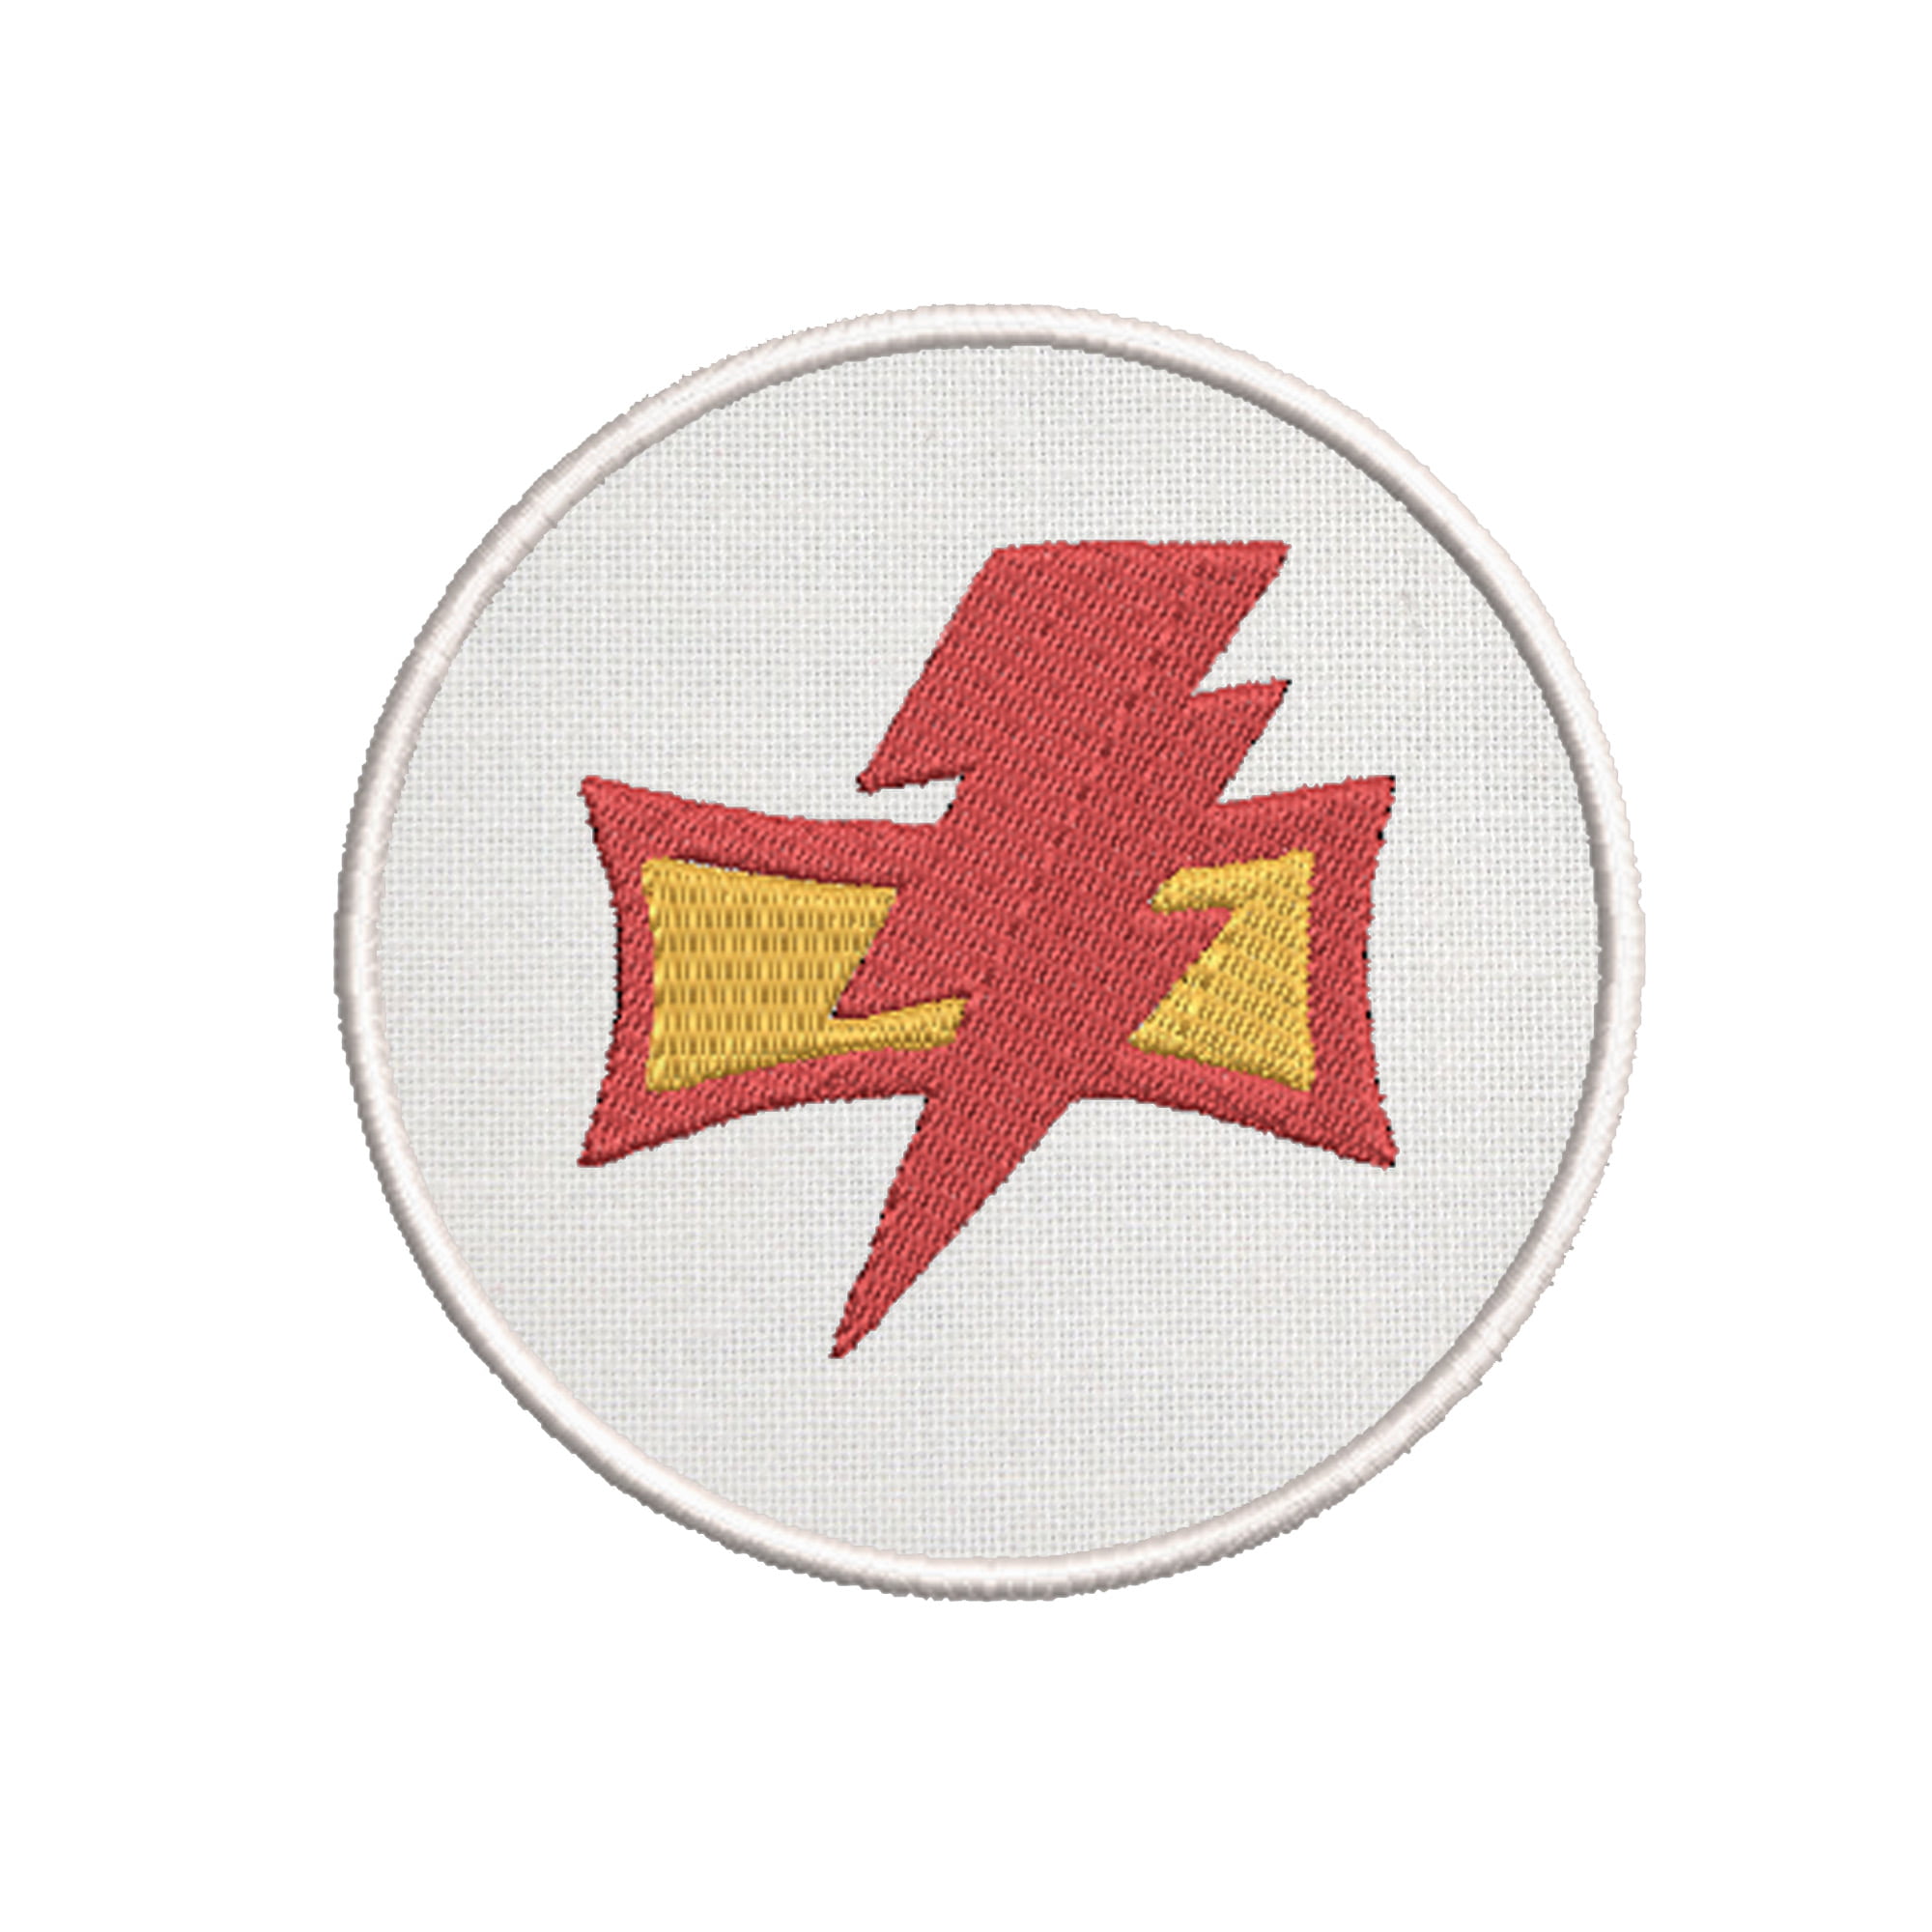 Ghostbusters Embroidered Iron Sew On Patch rock heavy metal jeans jacket Badge 